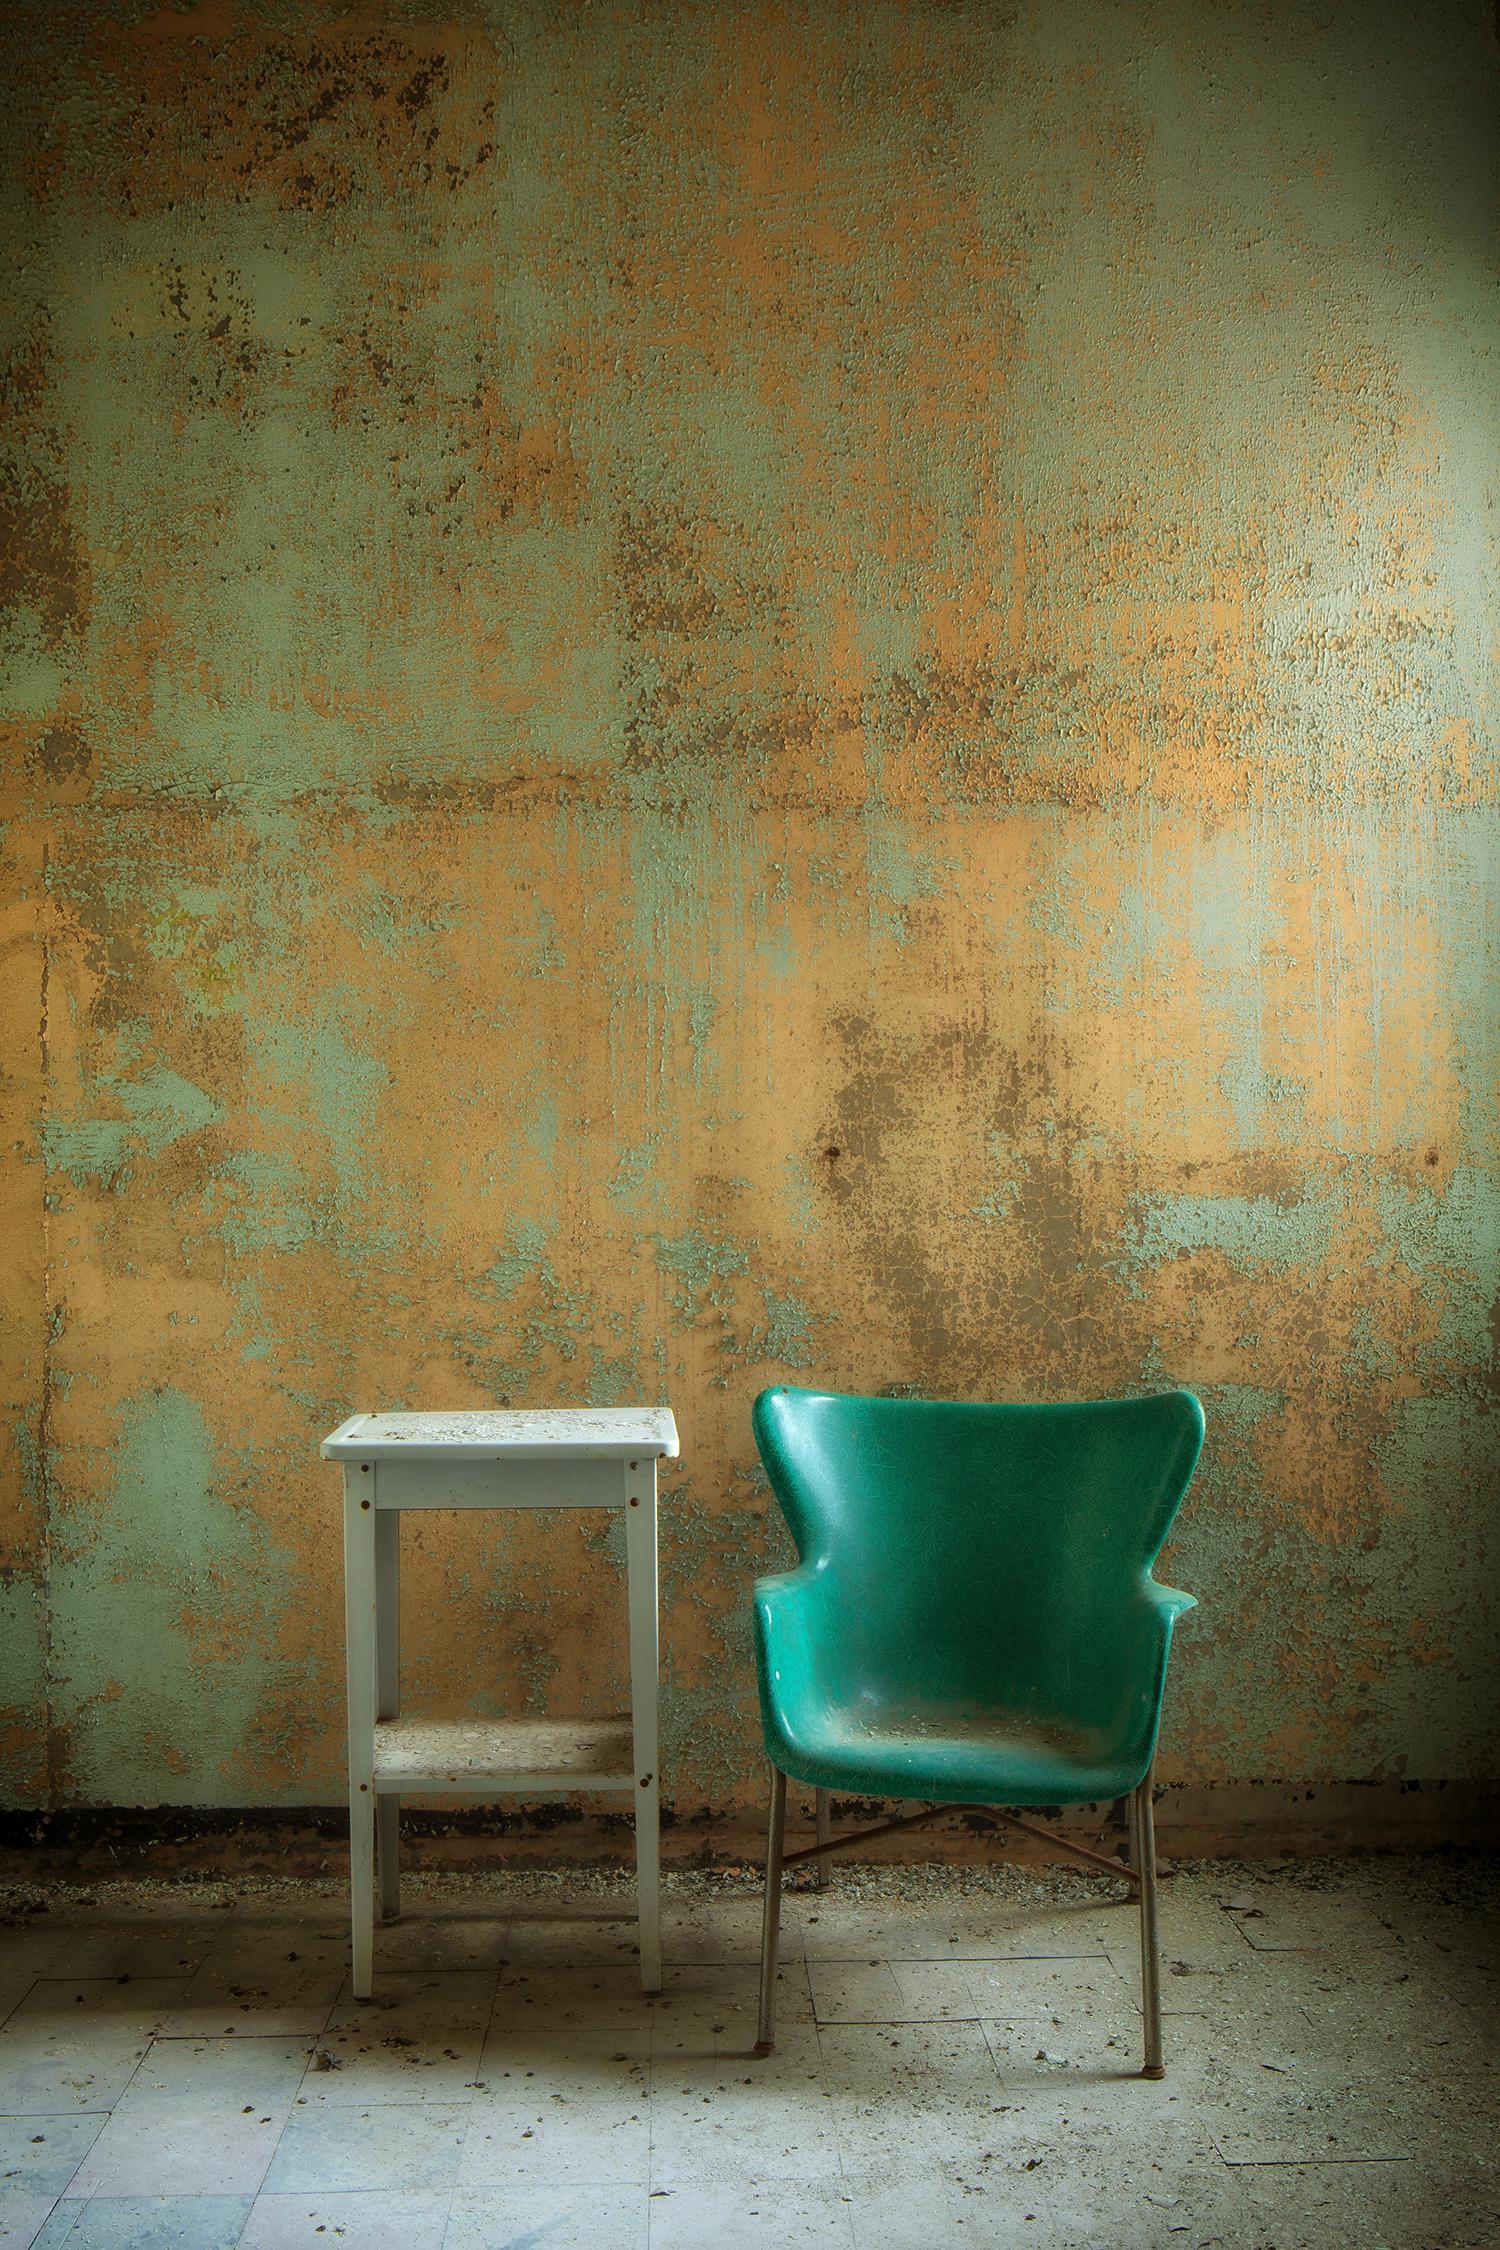 Rebecca Skinner Color Photograph - "Left", abandoned hospital, metal print, chair, blue, green, color photograph